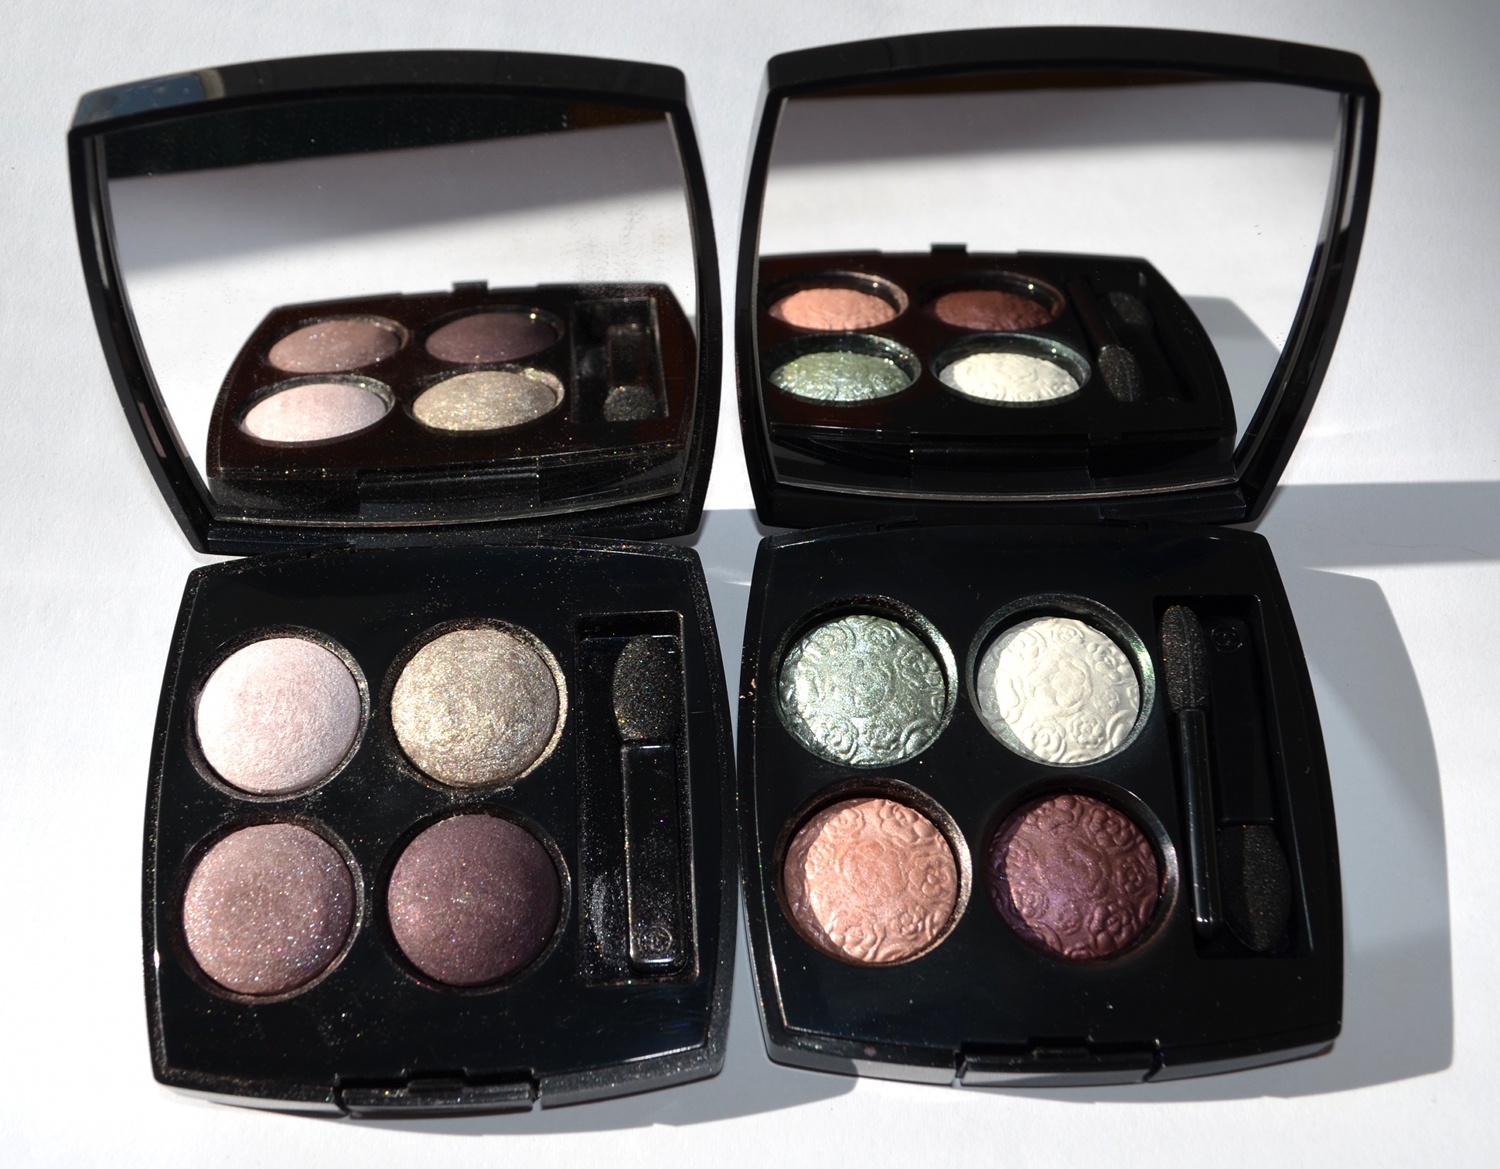 Chanel Ombres Fleuries Quadra Eye Shadow in Délicatesse